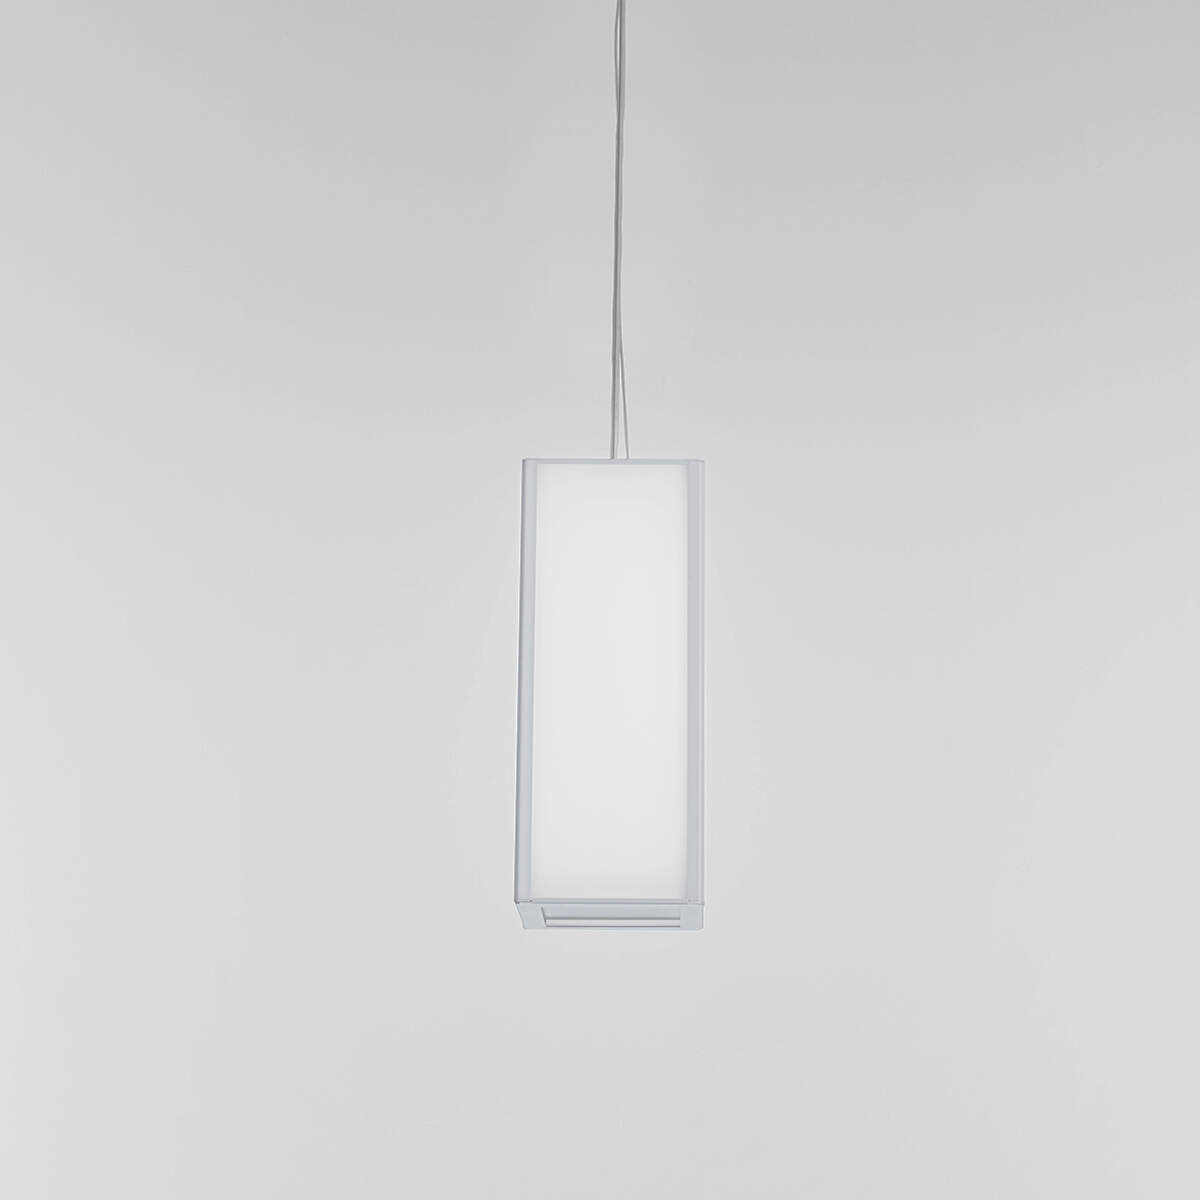 A large, rectangular pendant with a frame and luminous diffuser body 